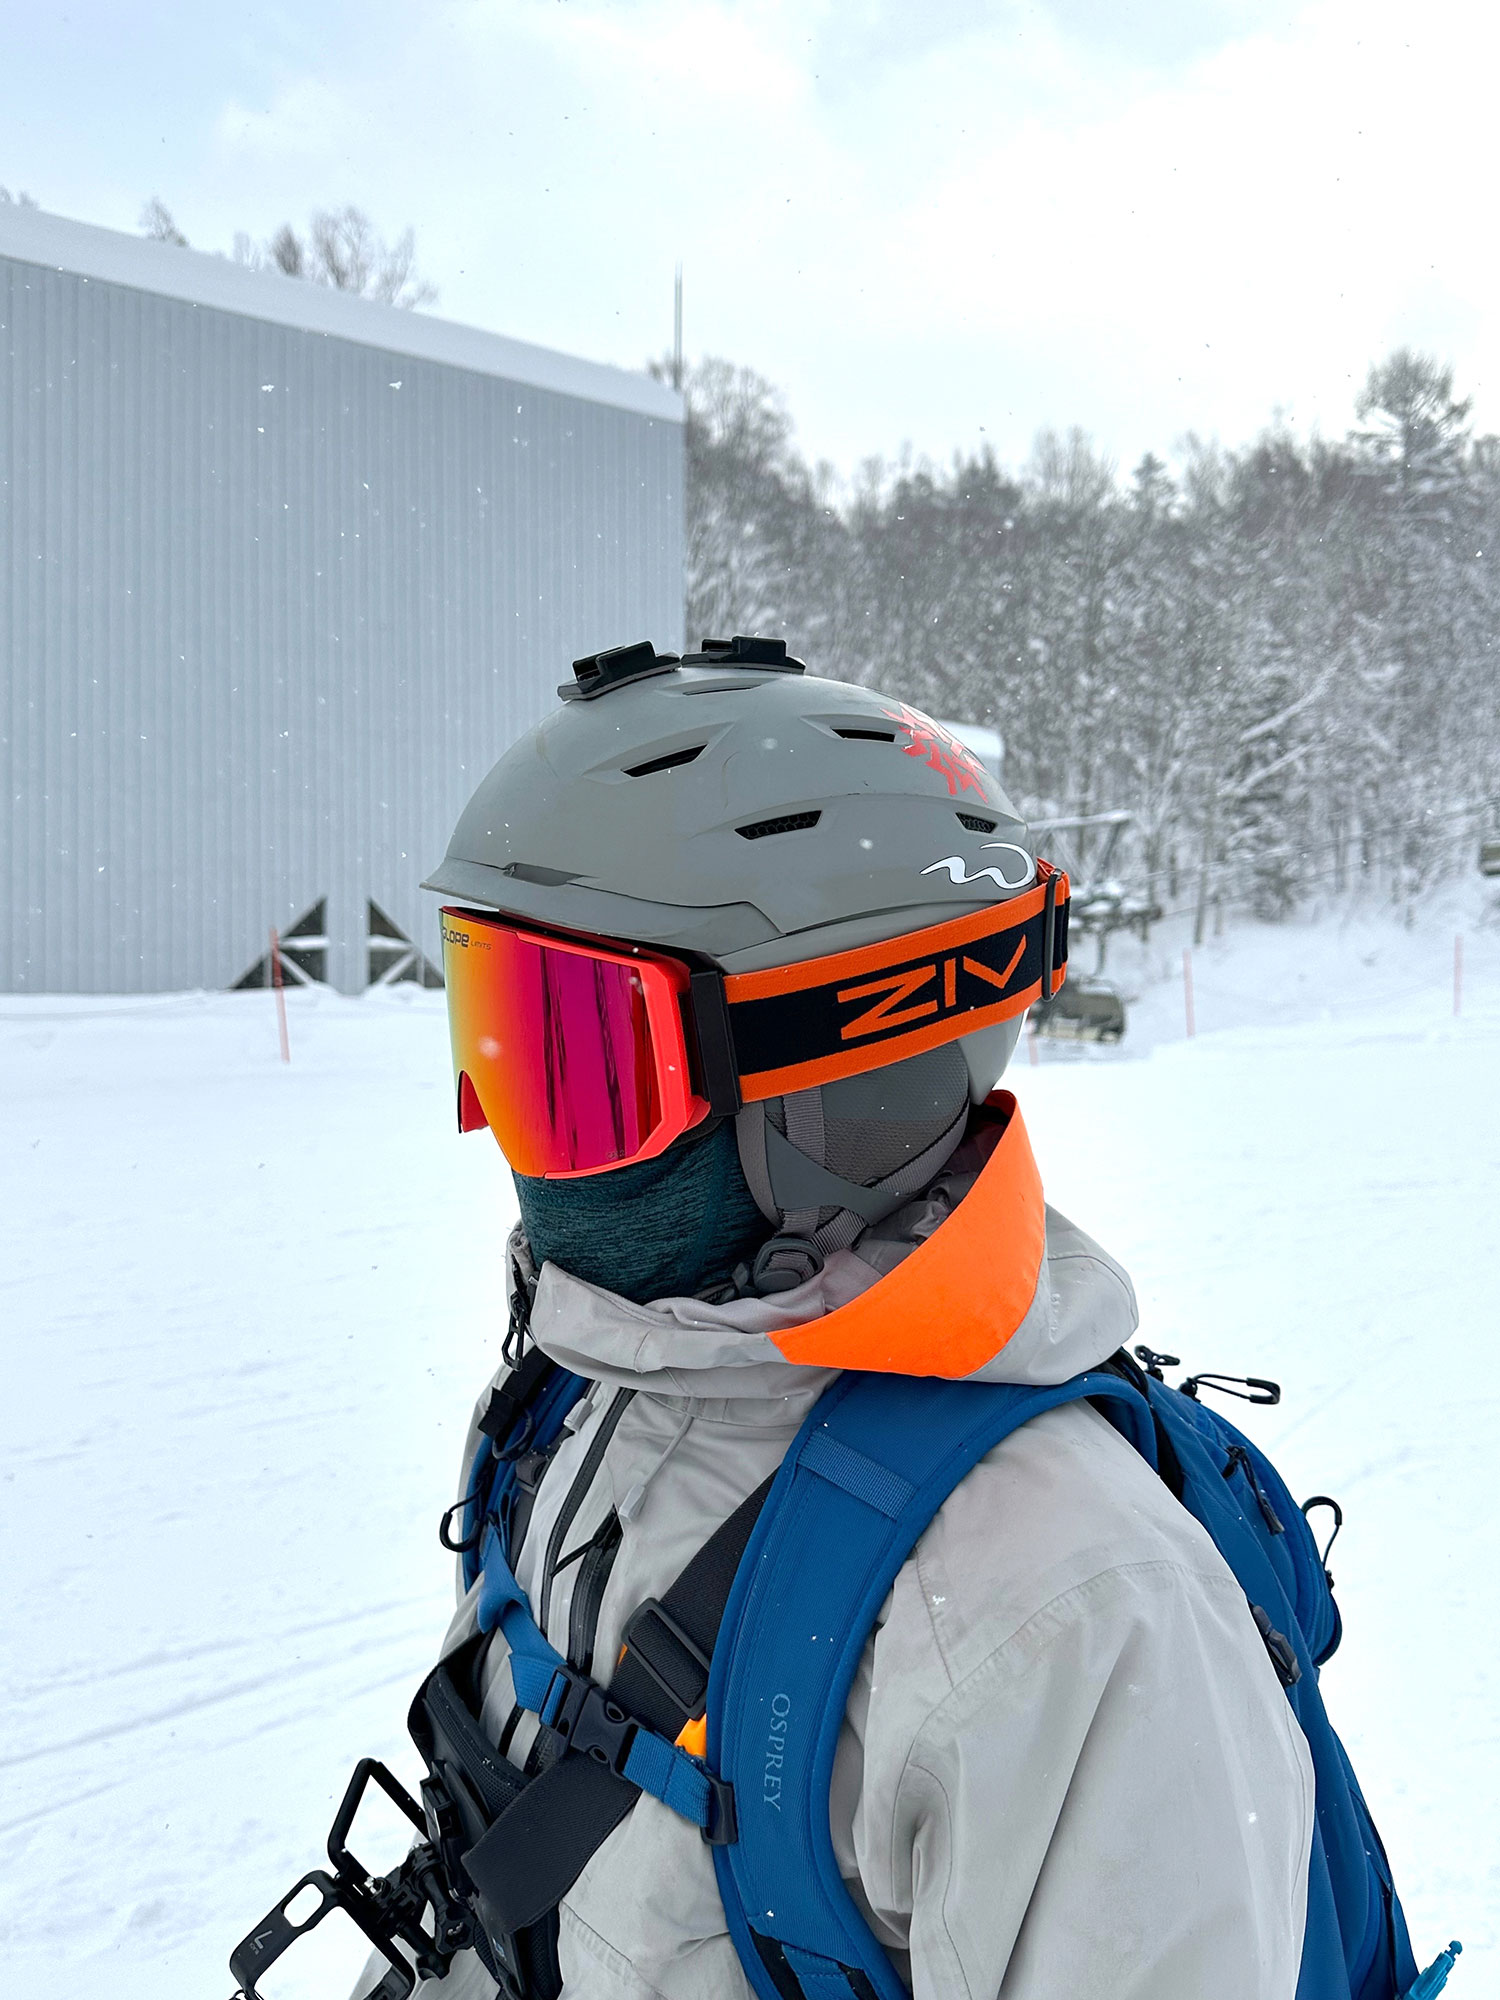 A skier wearing orange ZIV snow goggles, dressed in light gray cold-resistant clothing, carrying a blue backpack.